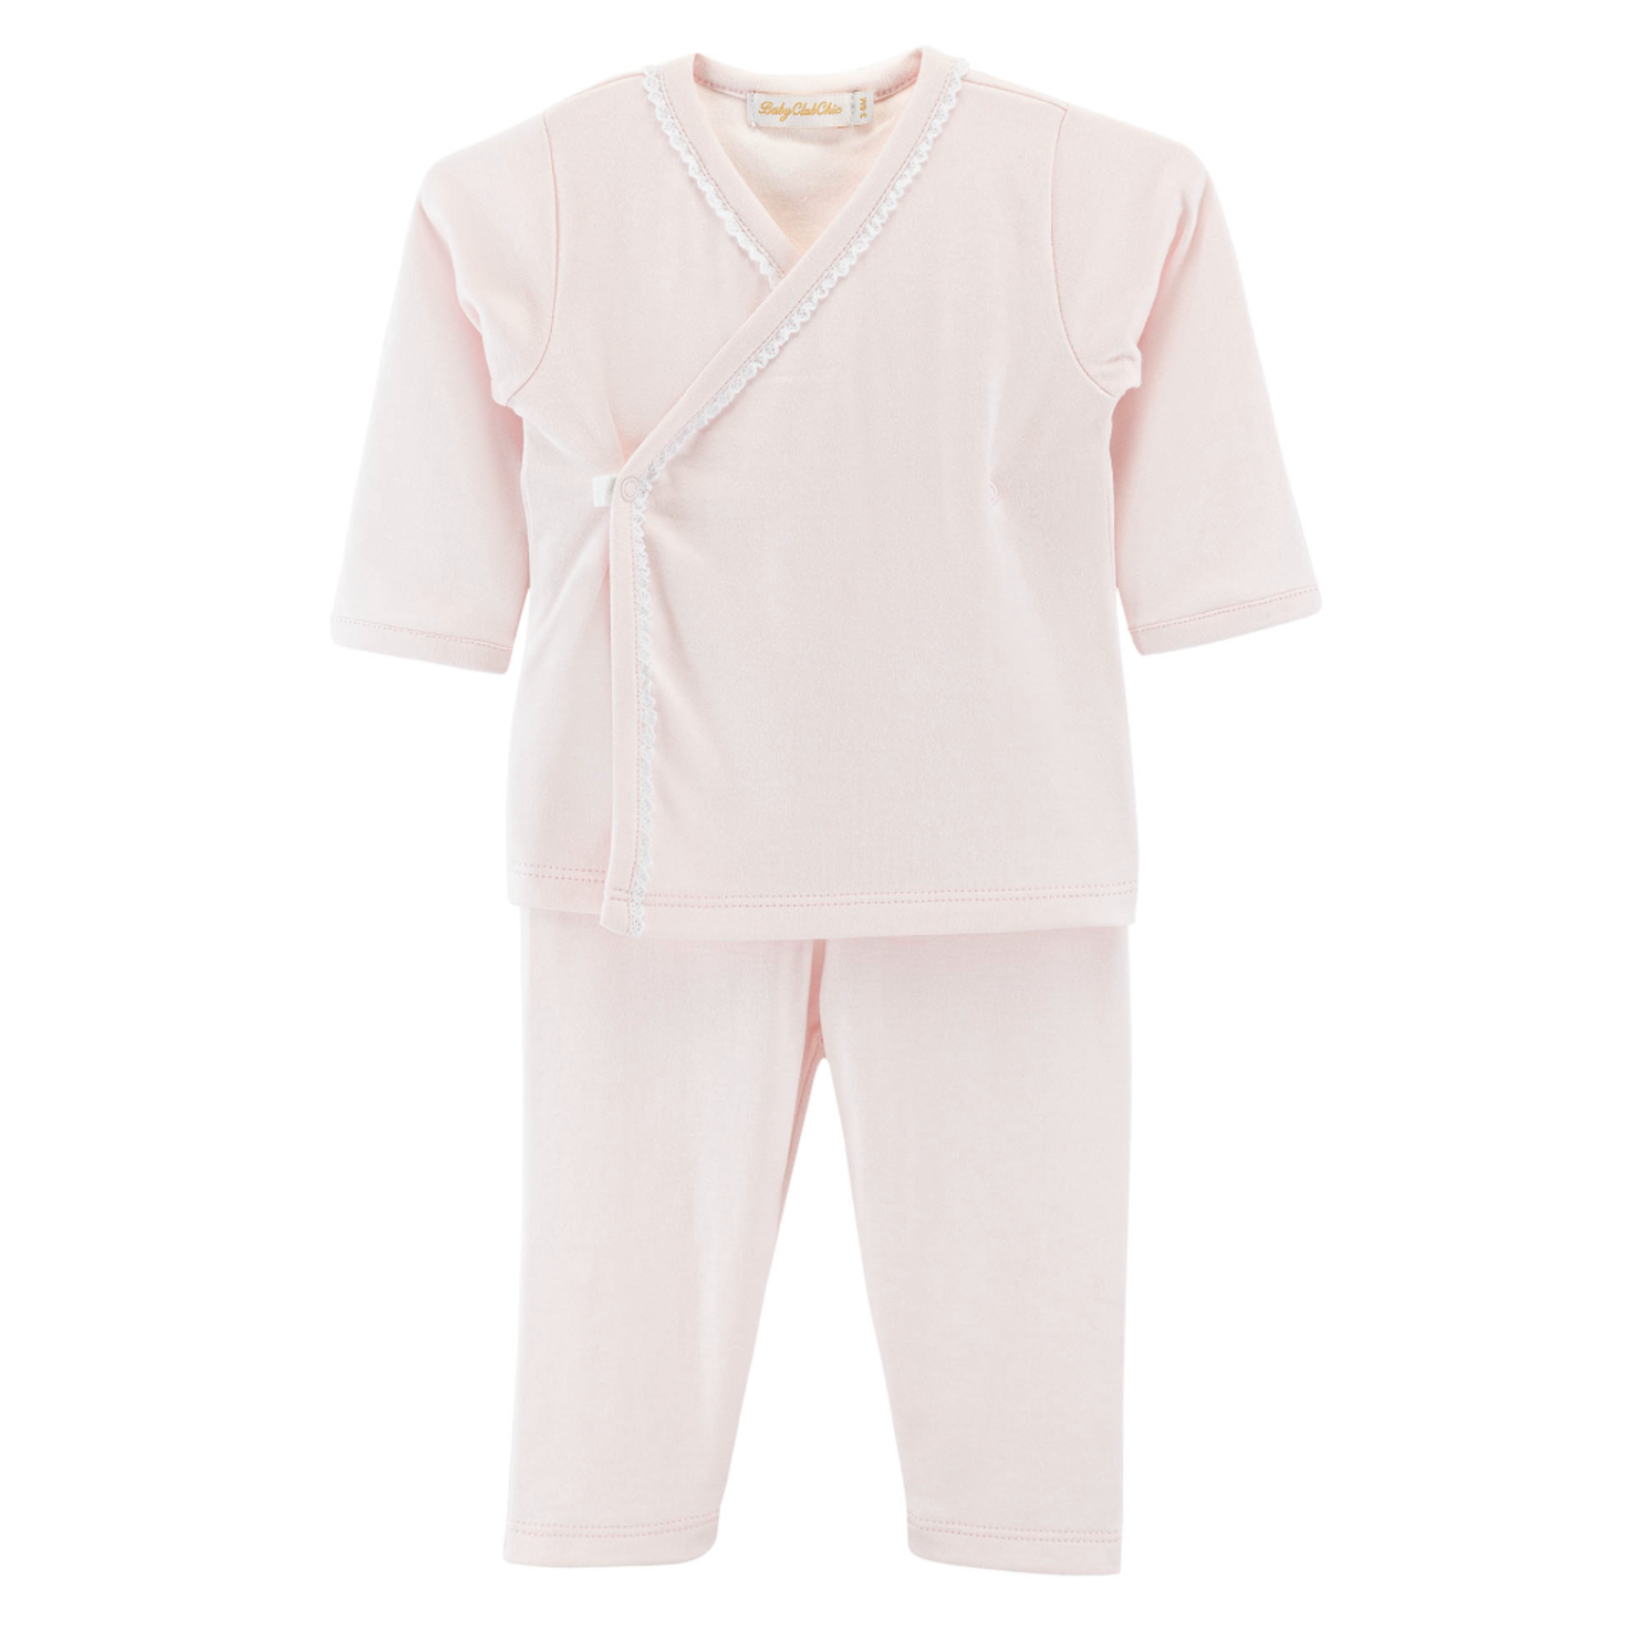 Baby Club Chic Pink Girl Crossed Tee w/Lace Trim & Pants